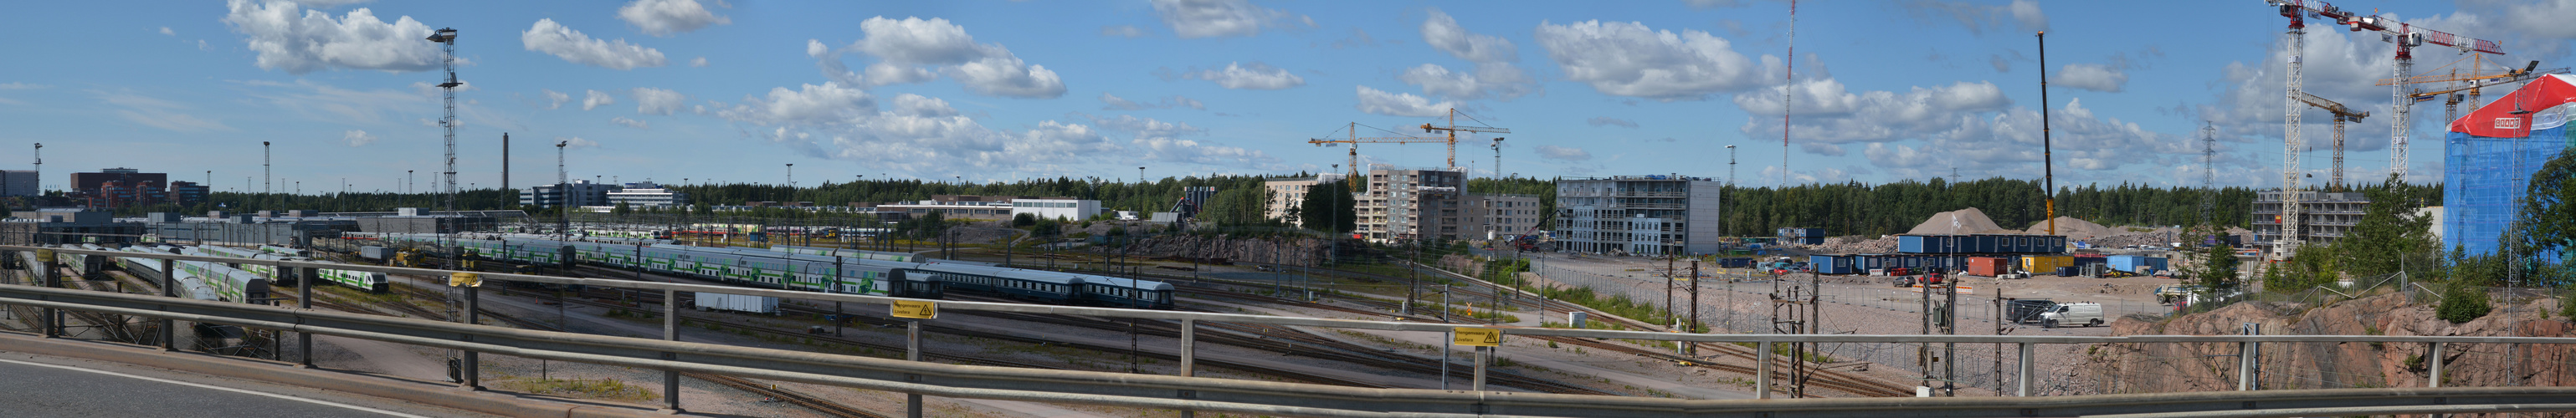 The truck area on Pasila and new housing estate